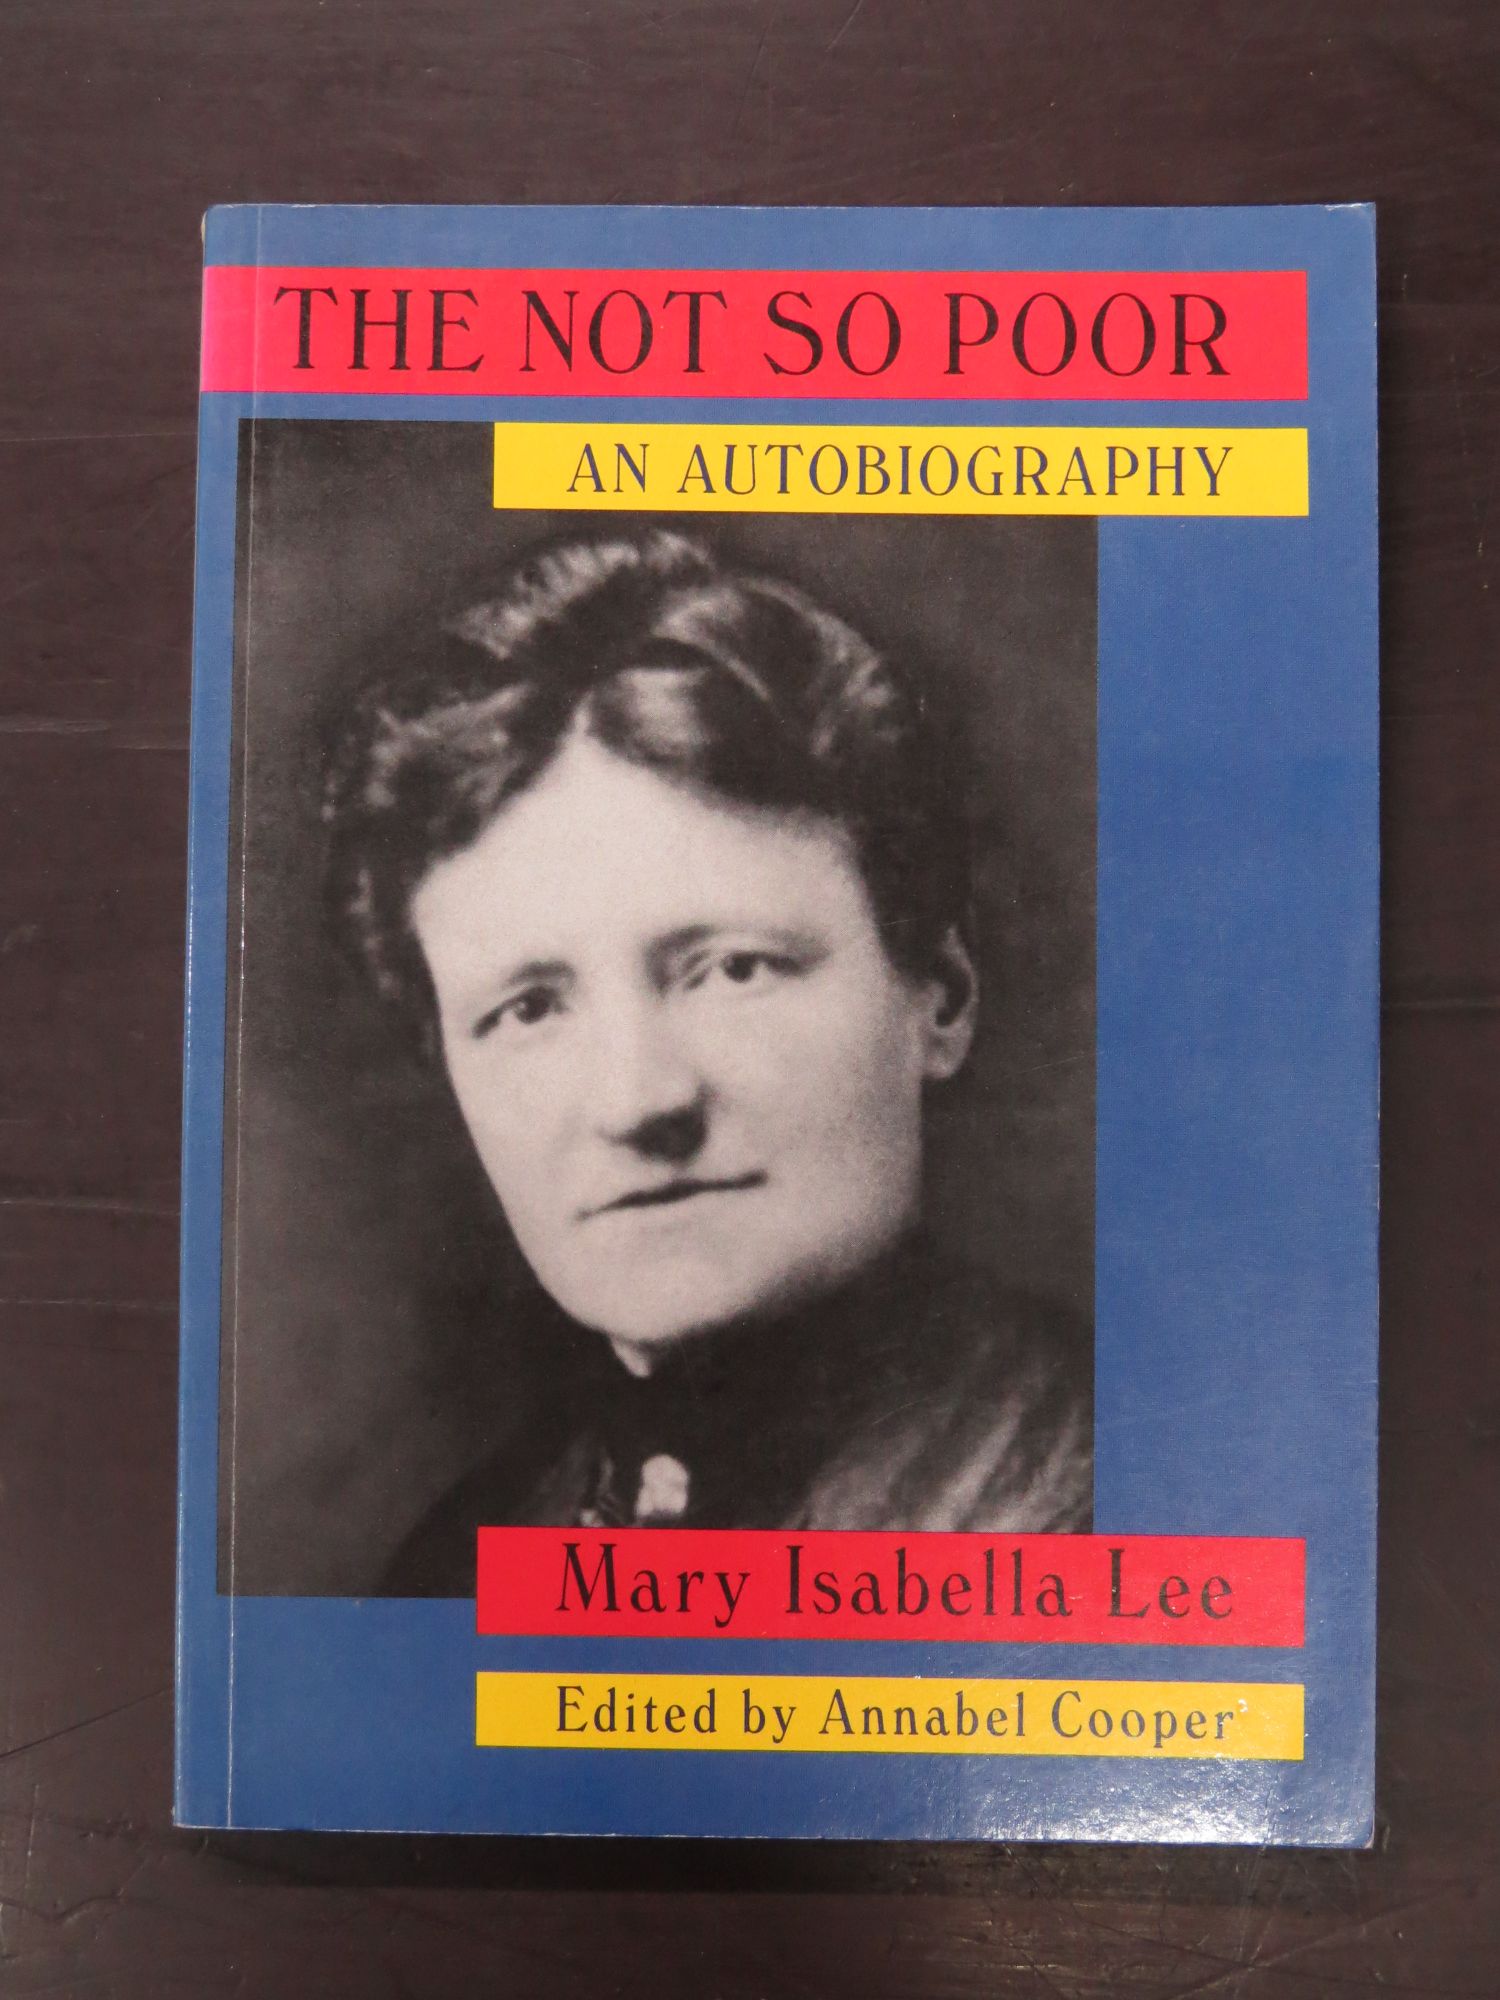 Annabel Cooper, ed., Mary Isabella Lee, The Not So Poor, An Autobiography |  Deadsouls Bookshop